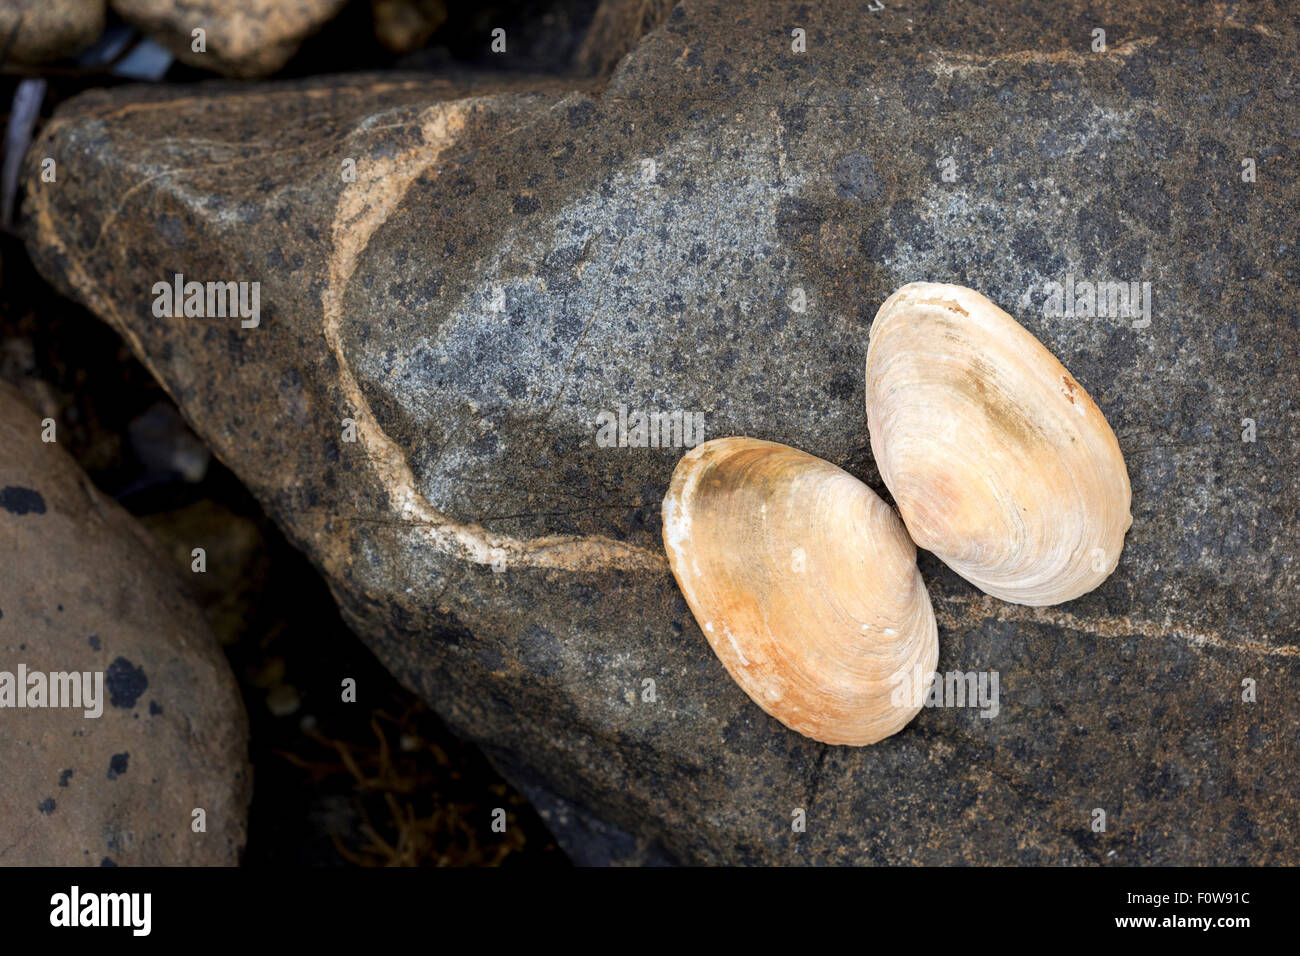 clam shell and rock still life Stock Photo